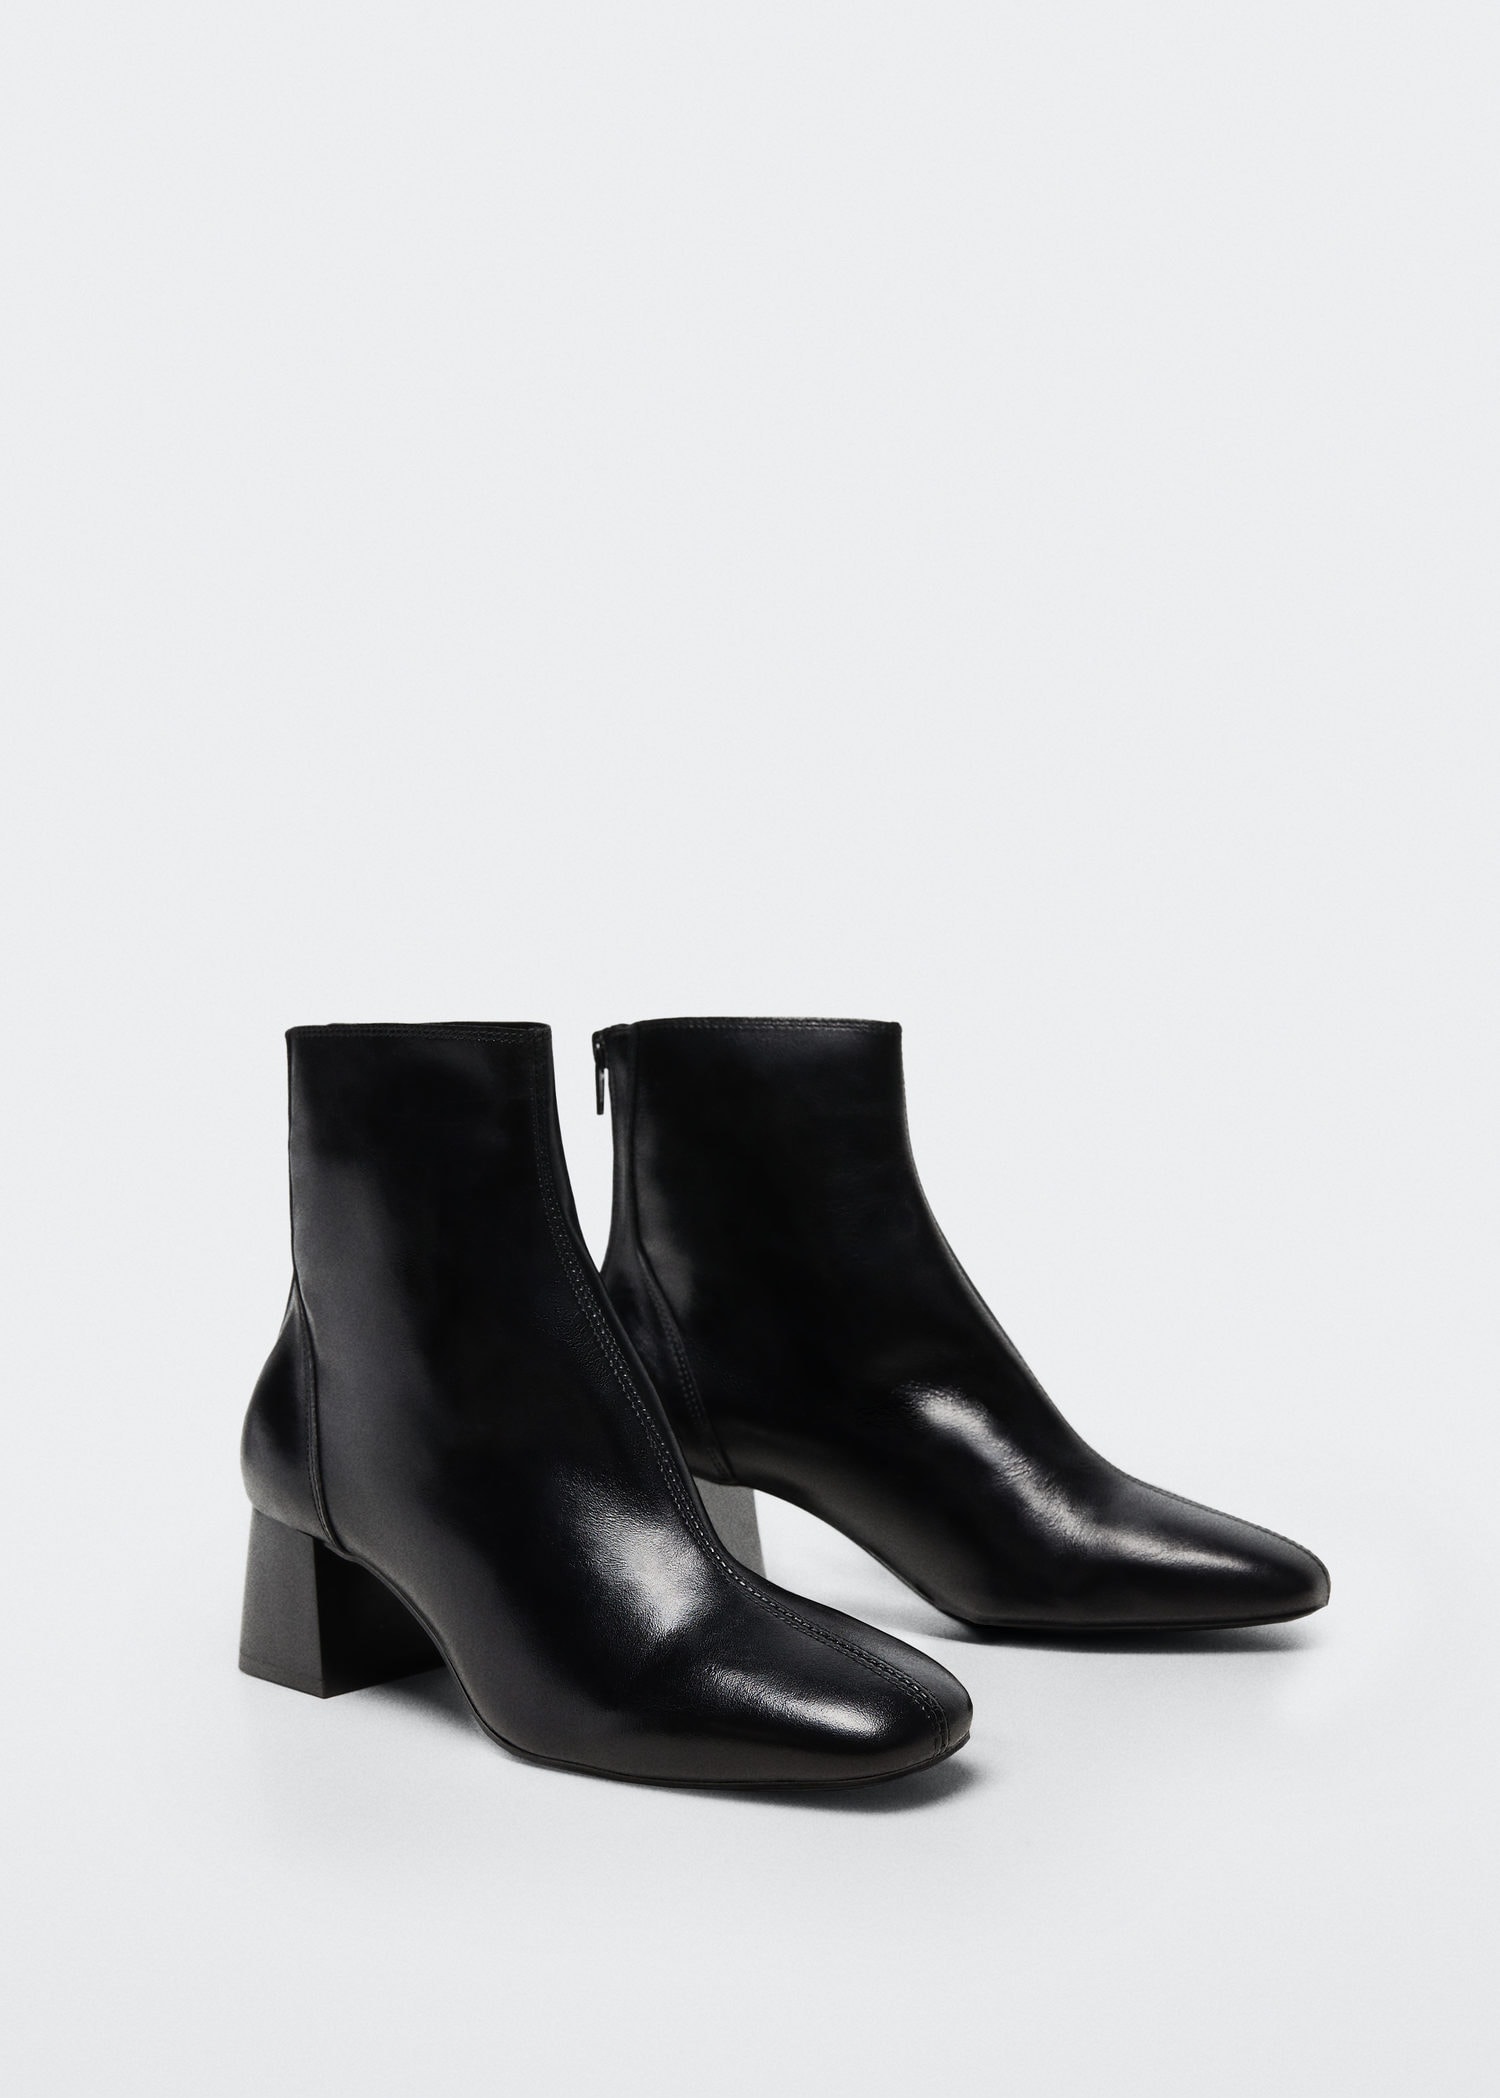 Mango Heel Leather Ankle Boots